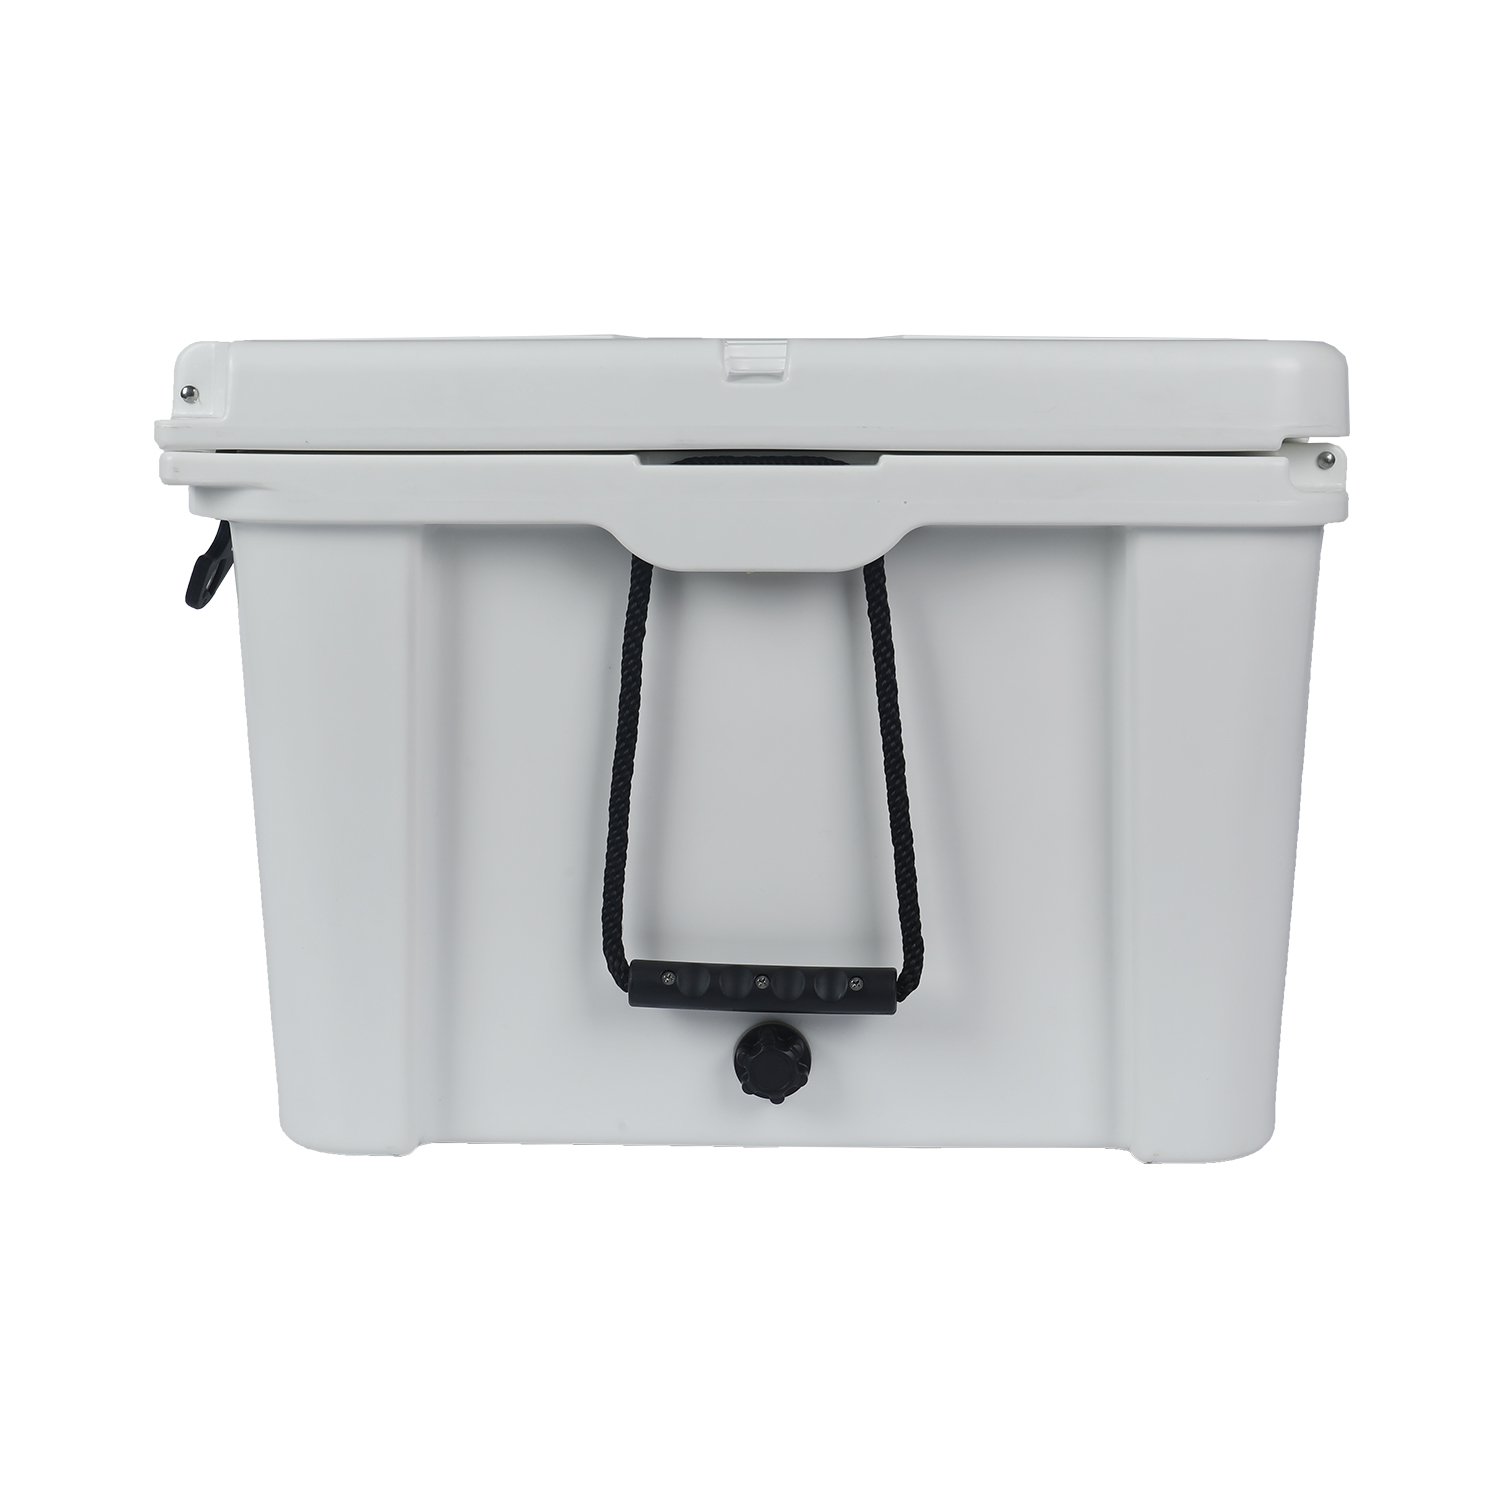 Snowball Coolers for Camping, Fishing, Hunting, BBQs & Outdoor Activities, White,116QT(110L)